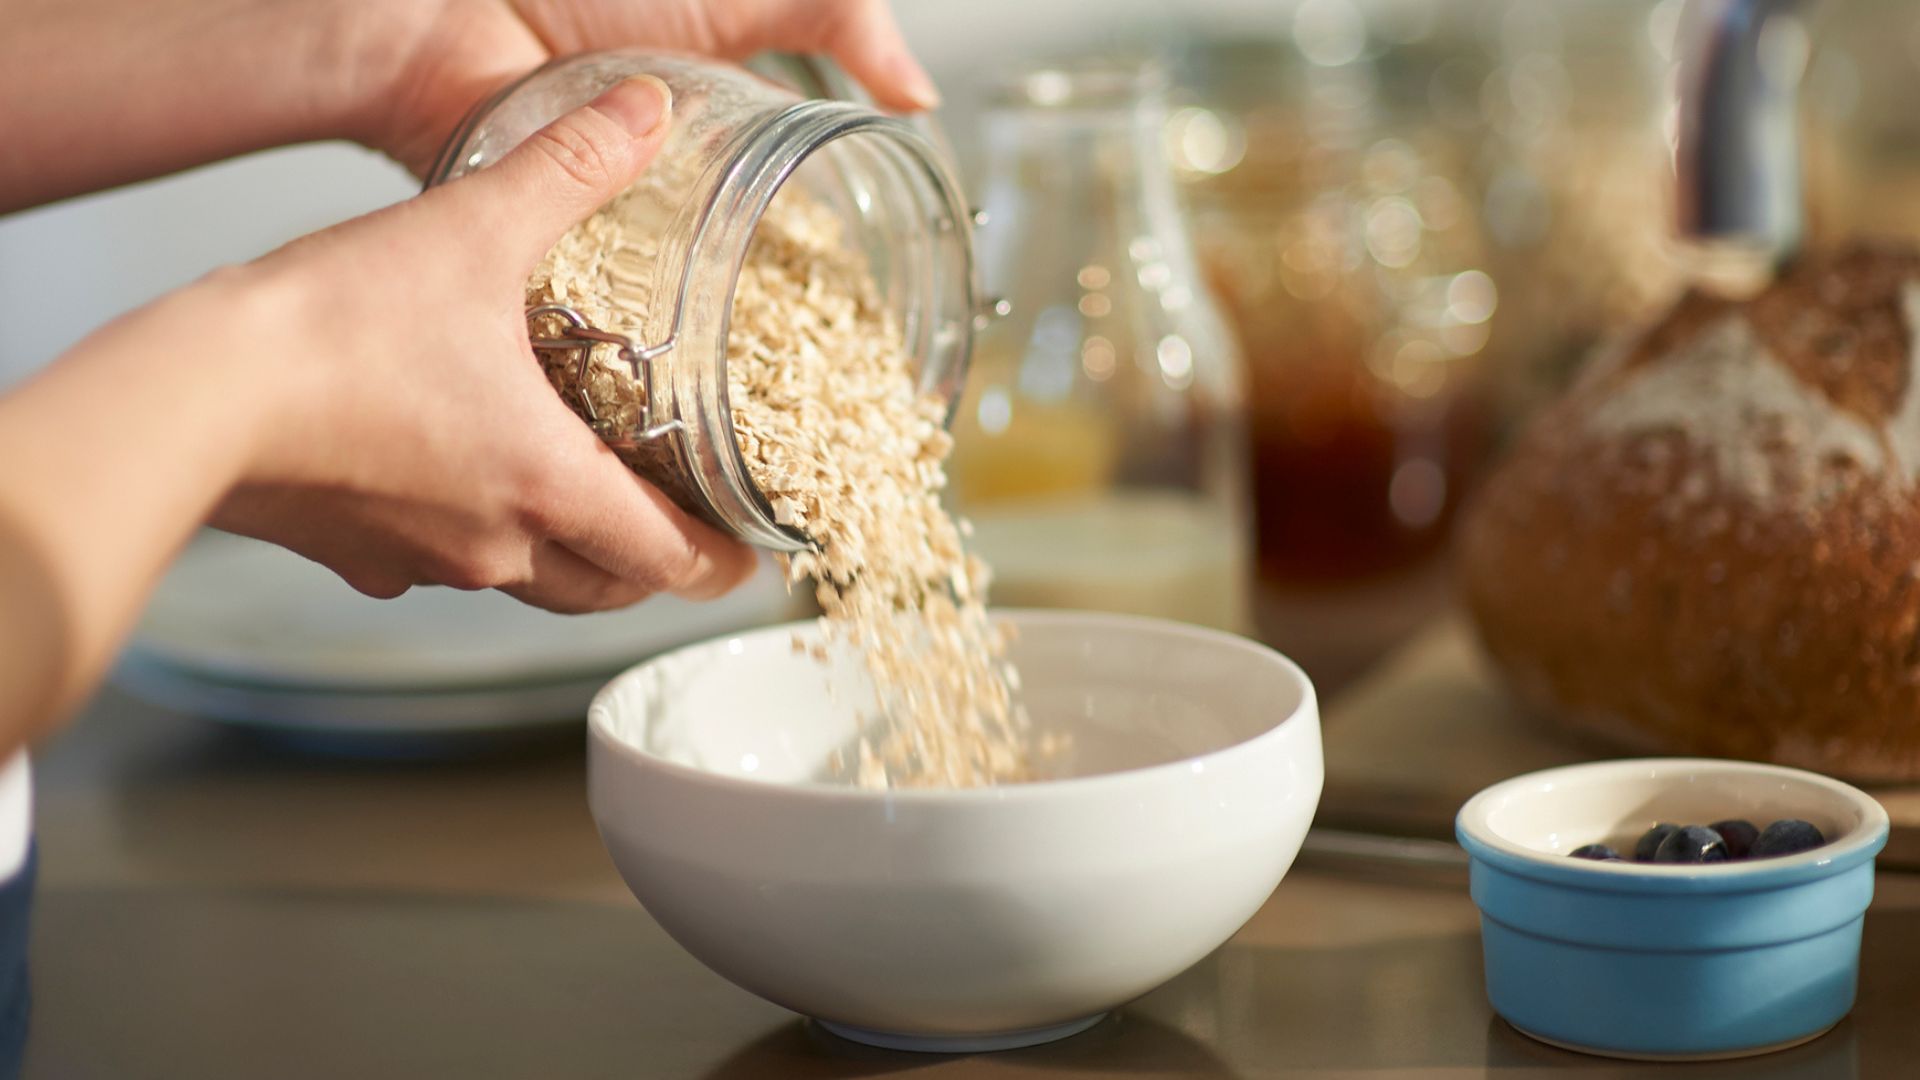 Woman's hands pouring oats into a ceramic bowl from glass container